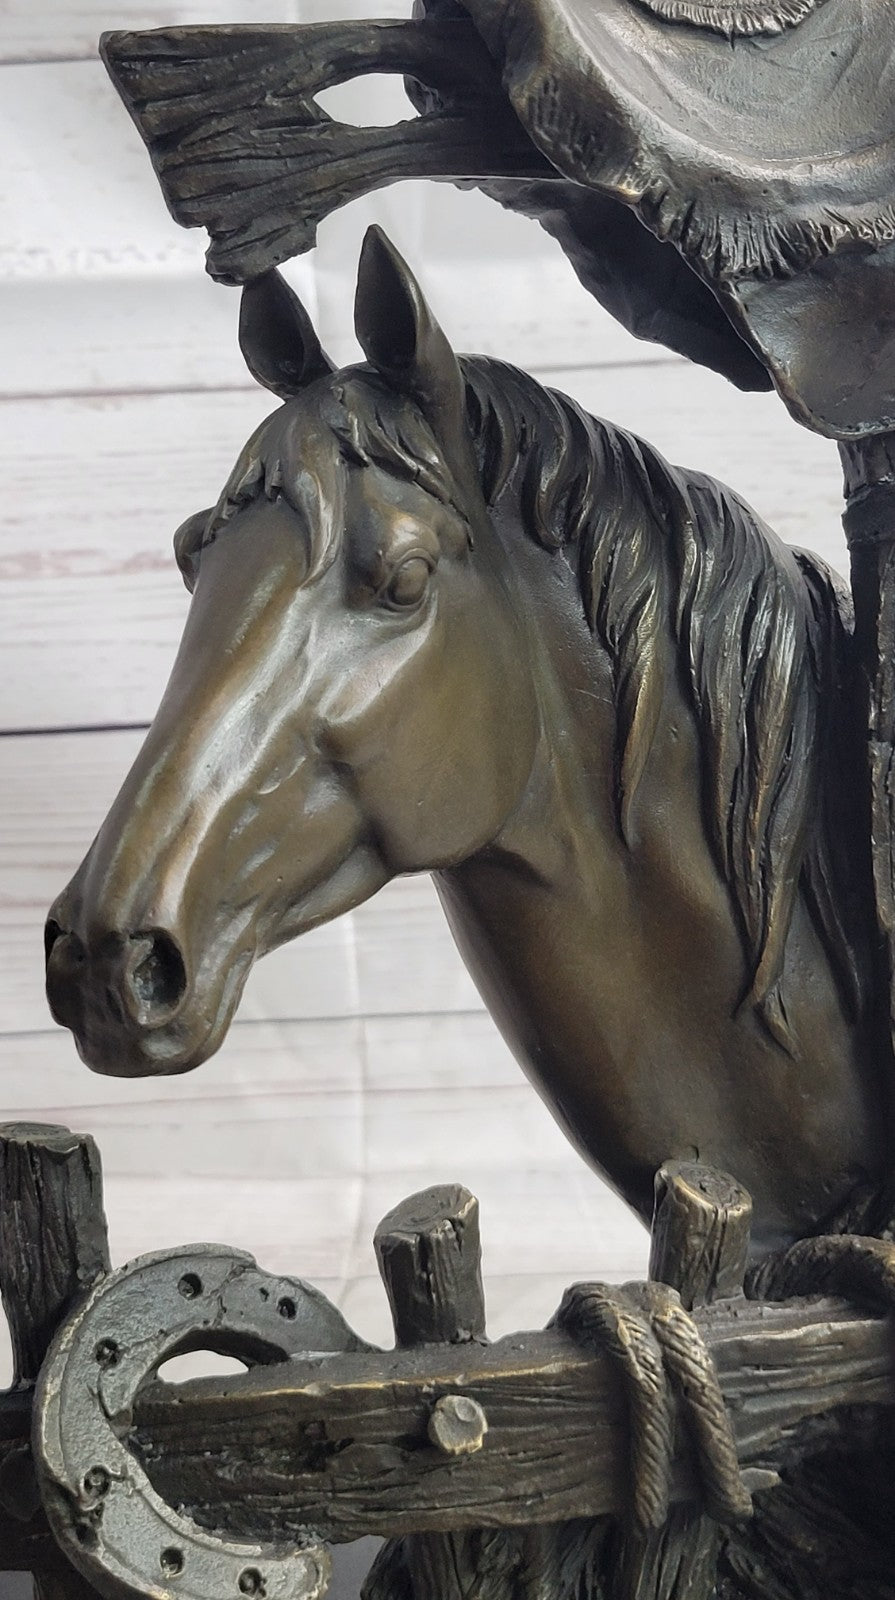 Bronze Statue of a Loving Horse with Saddle in Western Art Cowboy Style